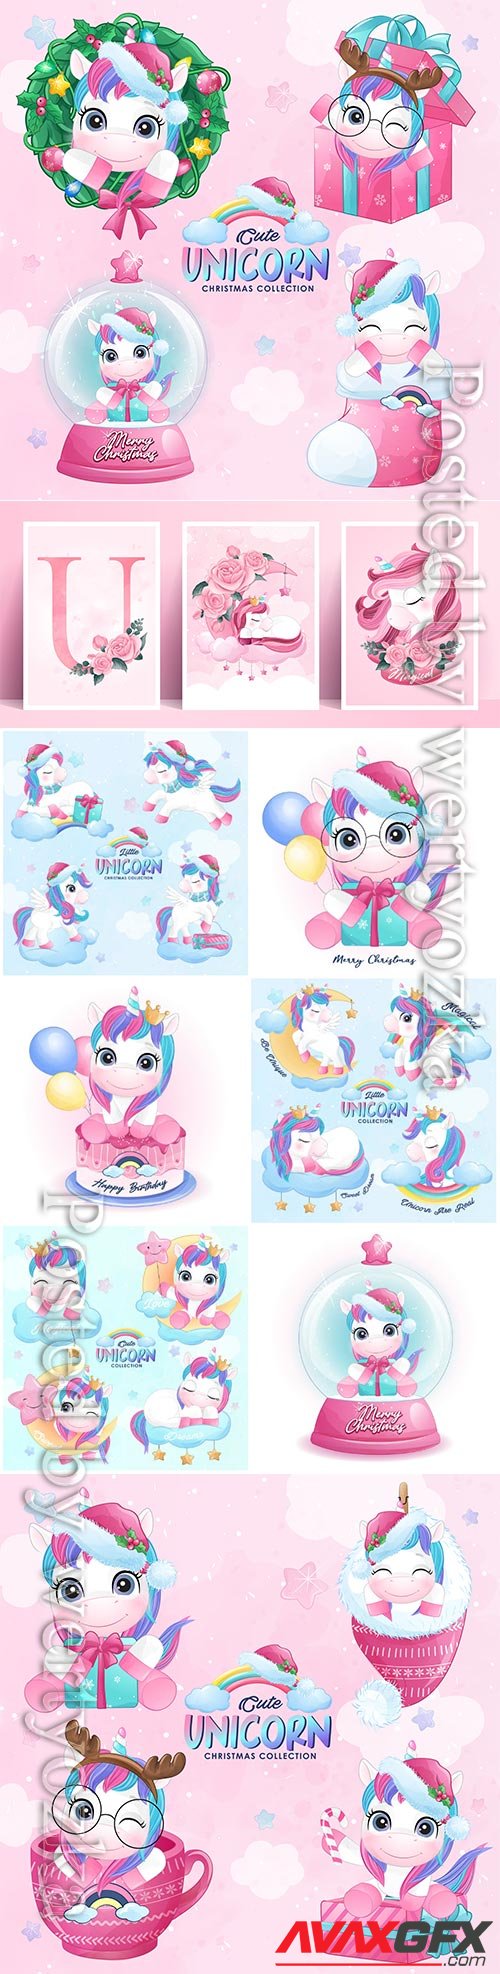 Cute doodle unicorn vector set in watercolor style